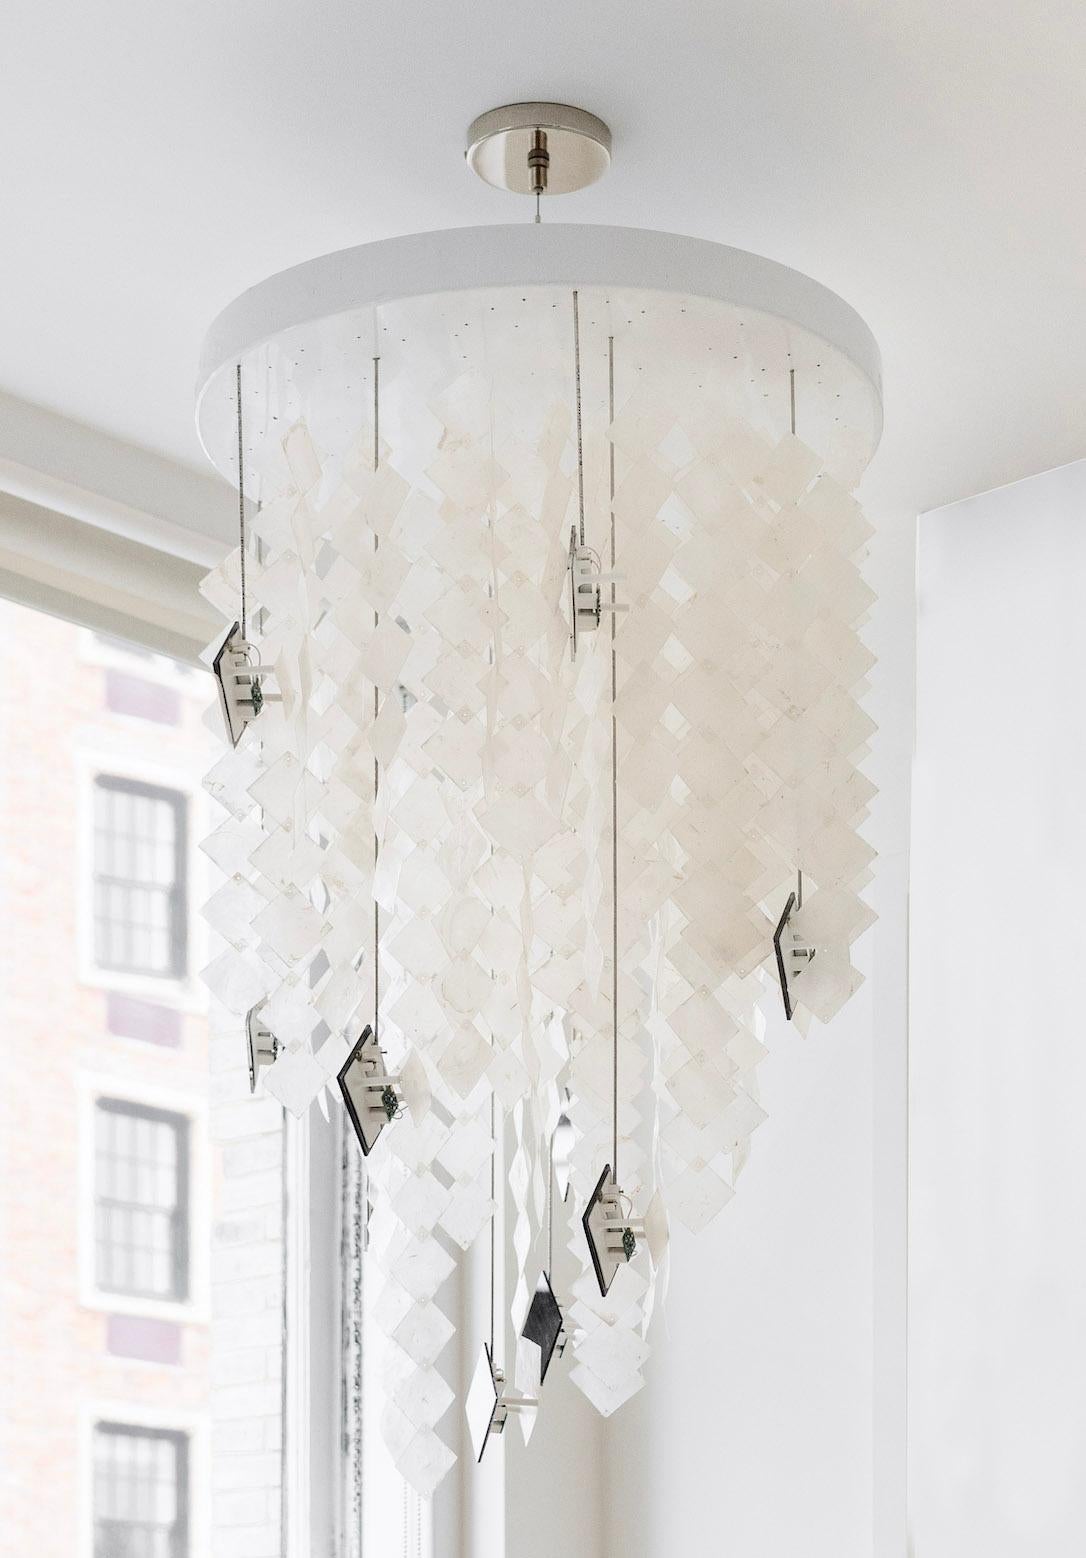 Solar chandelier, a customizable solar-powered lighting installation for the off-the-grid living room, comprises photovoltaic modules that power LED bulbs to illuminate translucent seashells to provide ambient lighting. The piece aims to demystify